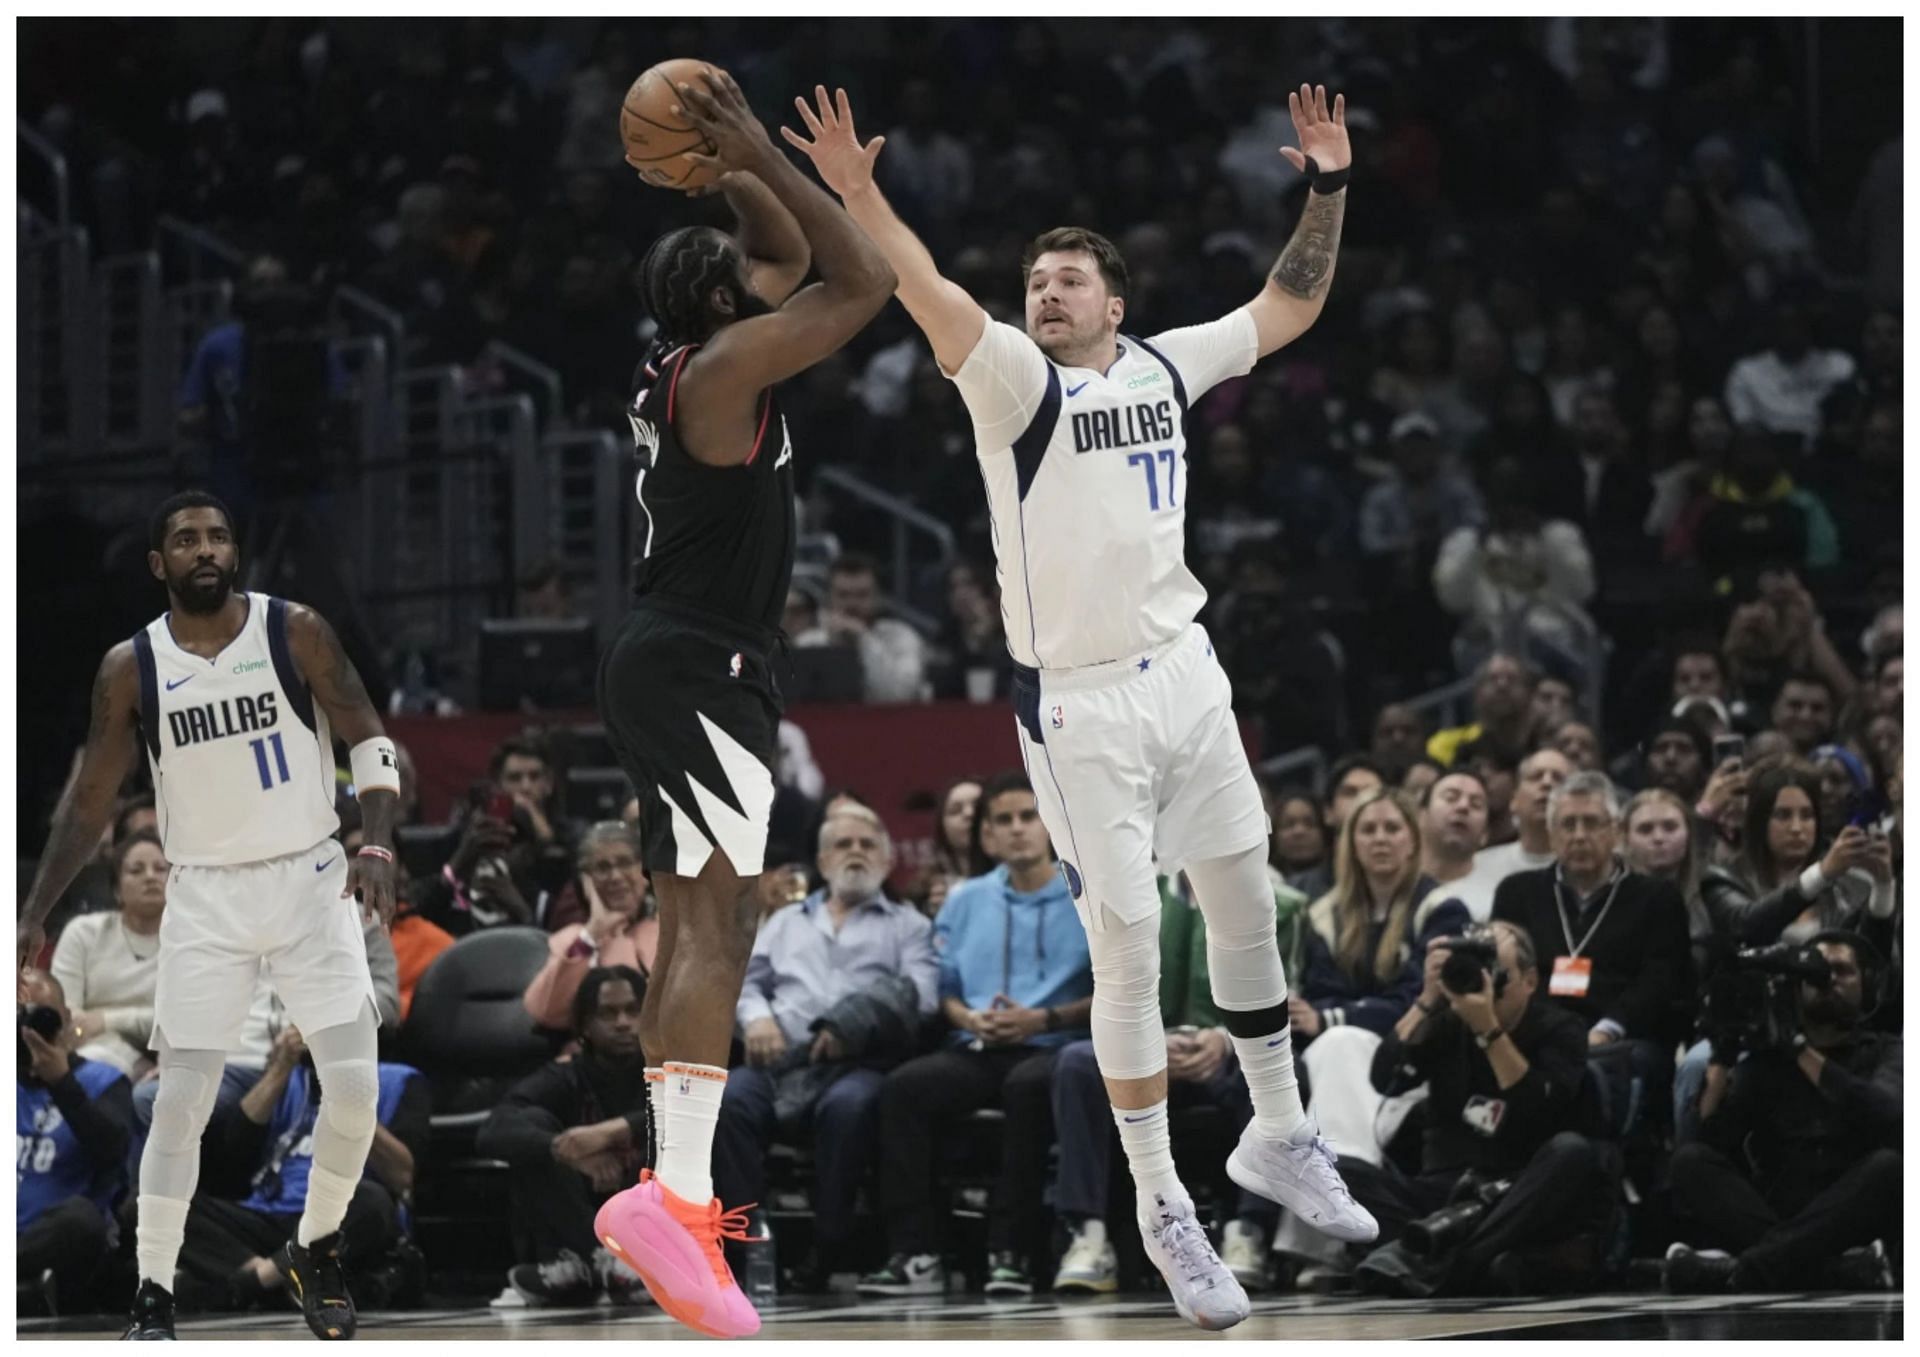 James Harden (left) and Luka Doncic (right) collide as the Dallas Mavericks face the LA Clippers on Wedesday, December 20 (AP Photo/Jae Hong)